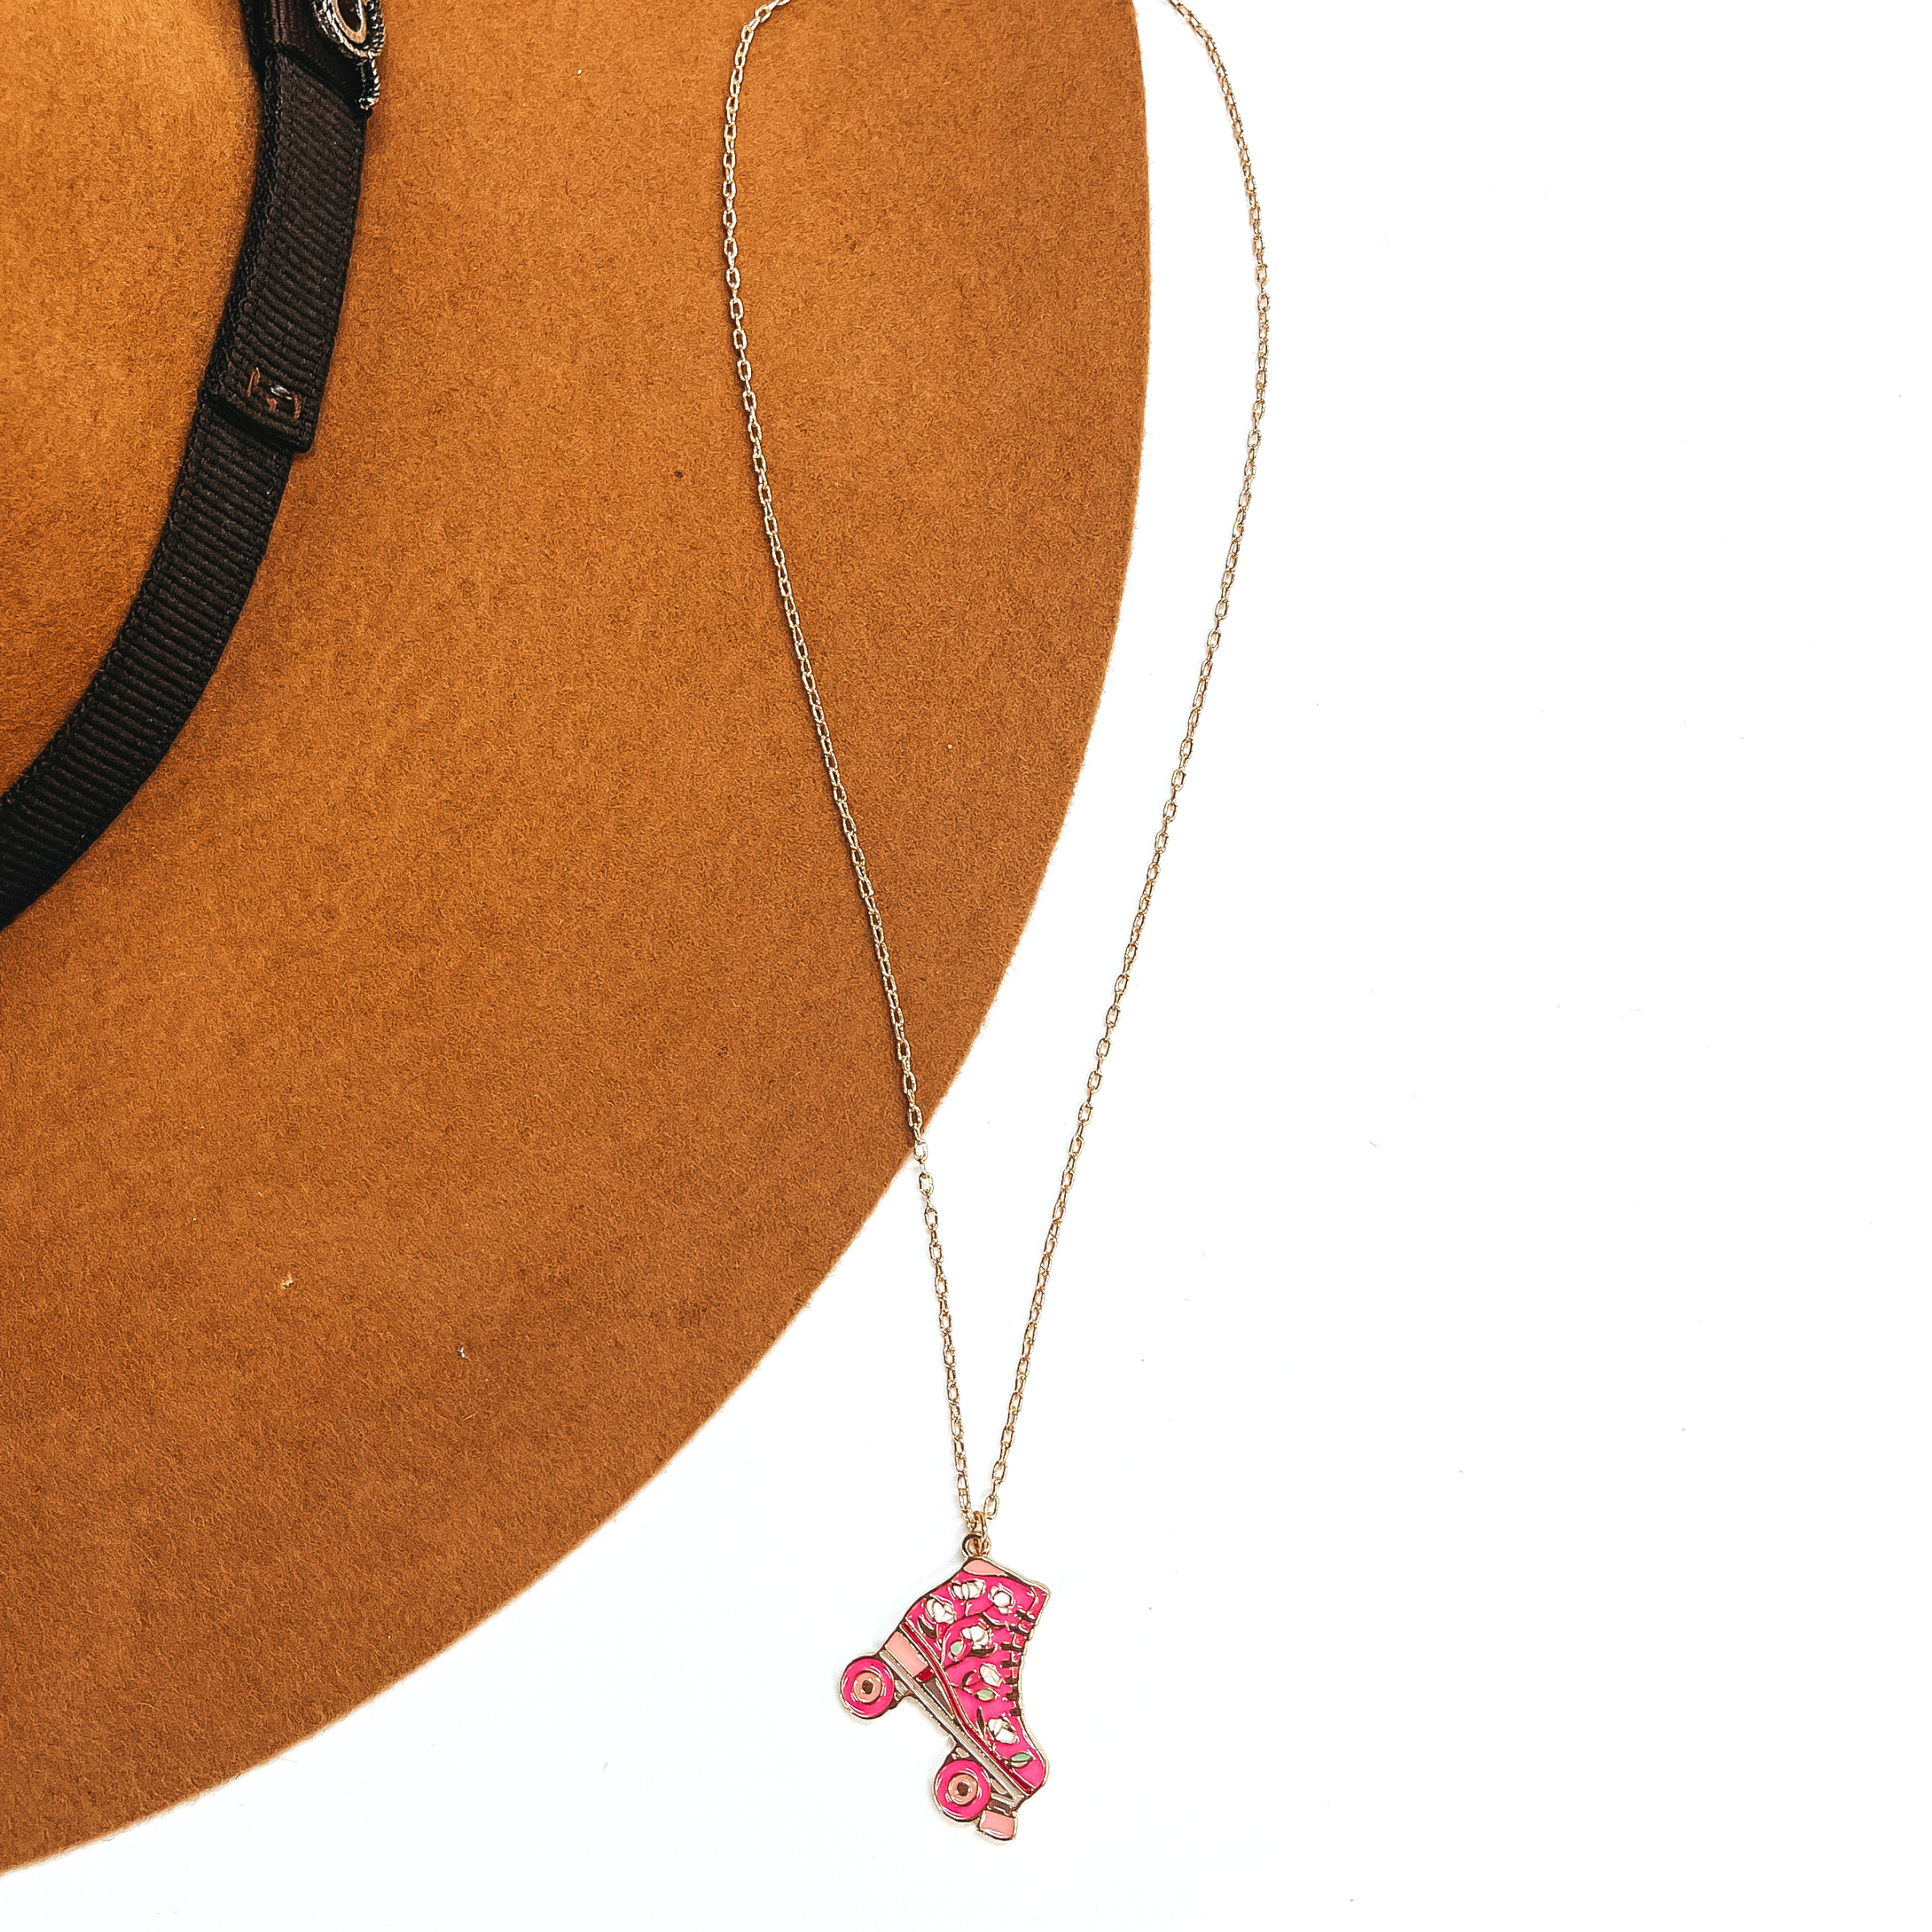 Gold thin chain necklace with a pink rollerskate pendant. The pink rollerskate has  white floral design in the center with different shades of pink. This necklace is taken  laying on a camel-brown, felt hat brim and on a white background.